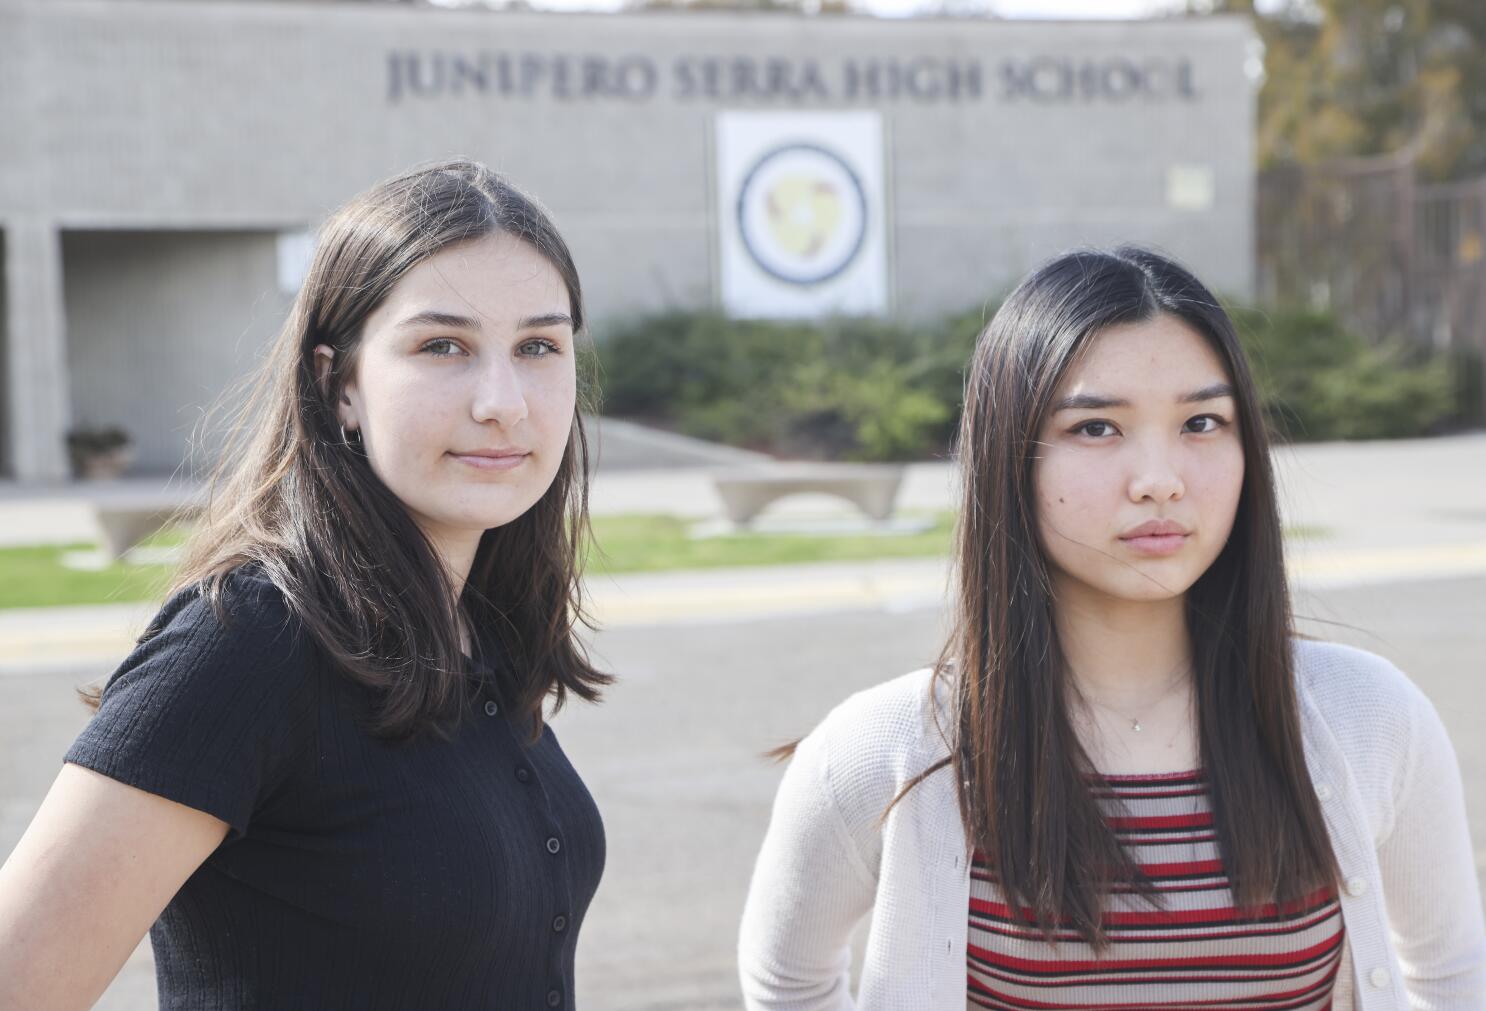 San Diego Unified changes name of Junipero Serra High School, removes  conquistador mascot - The San Diego Union-Tribune